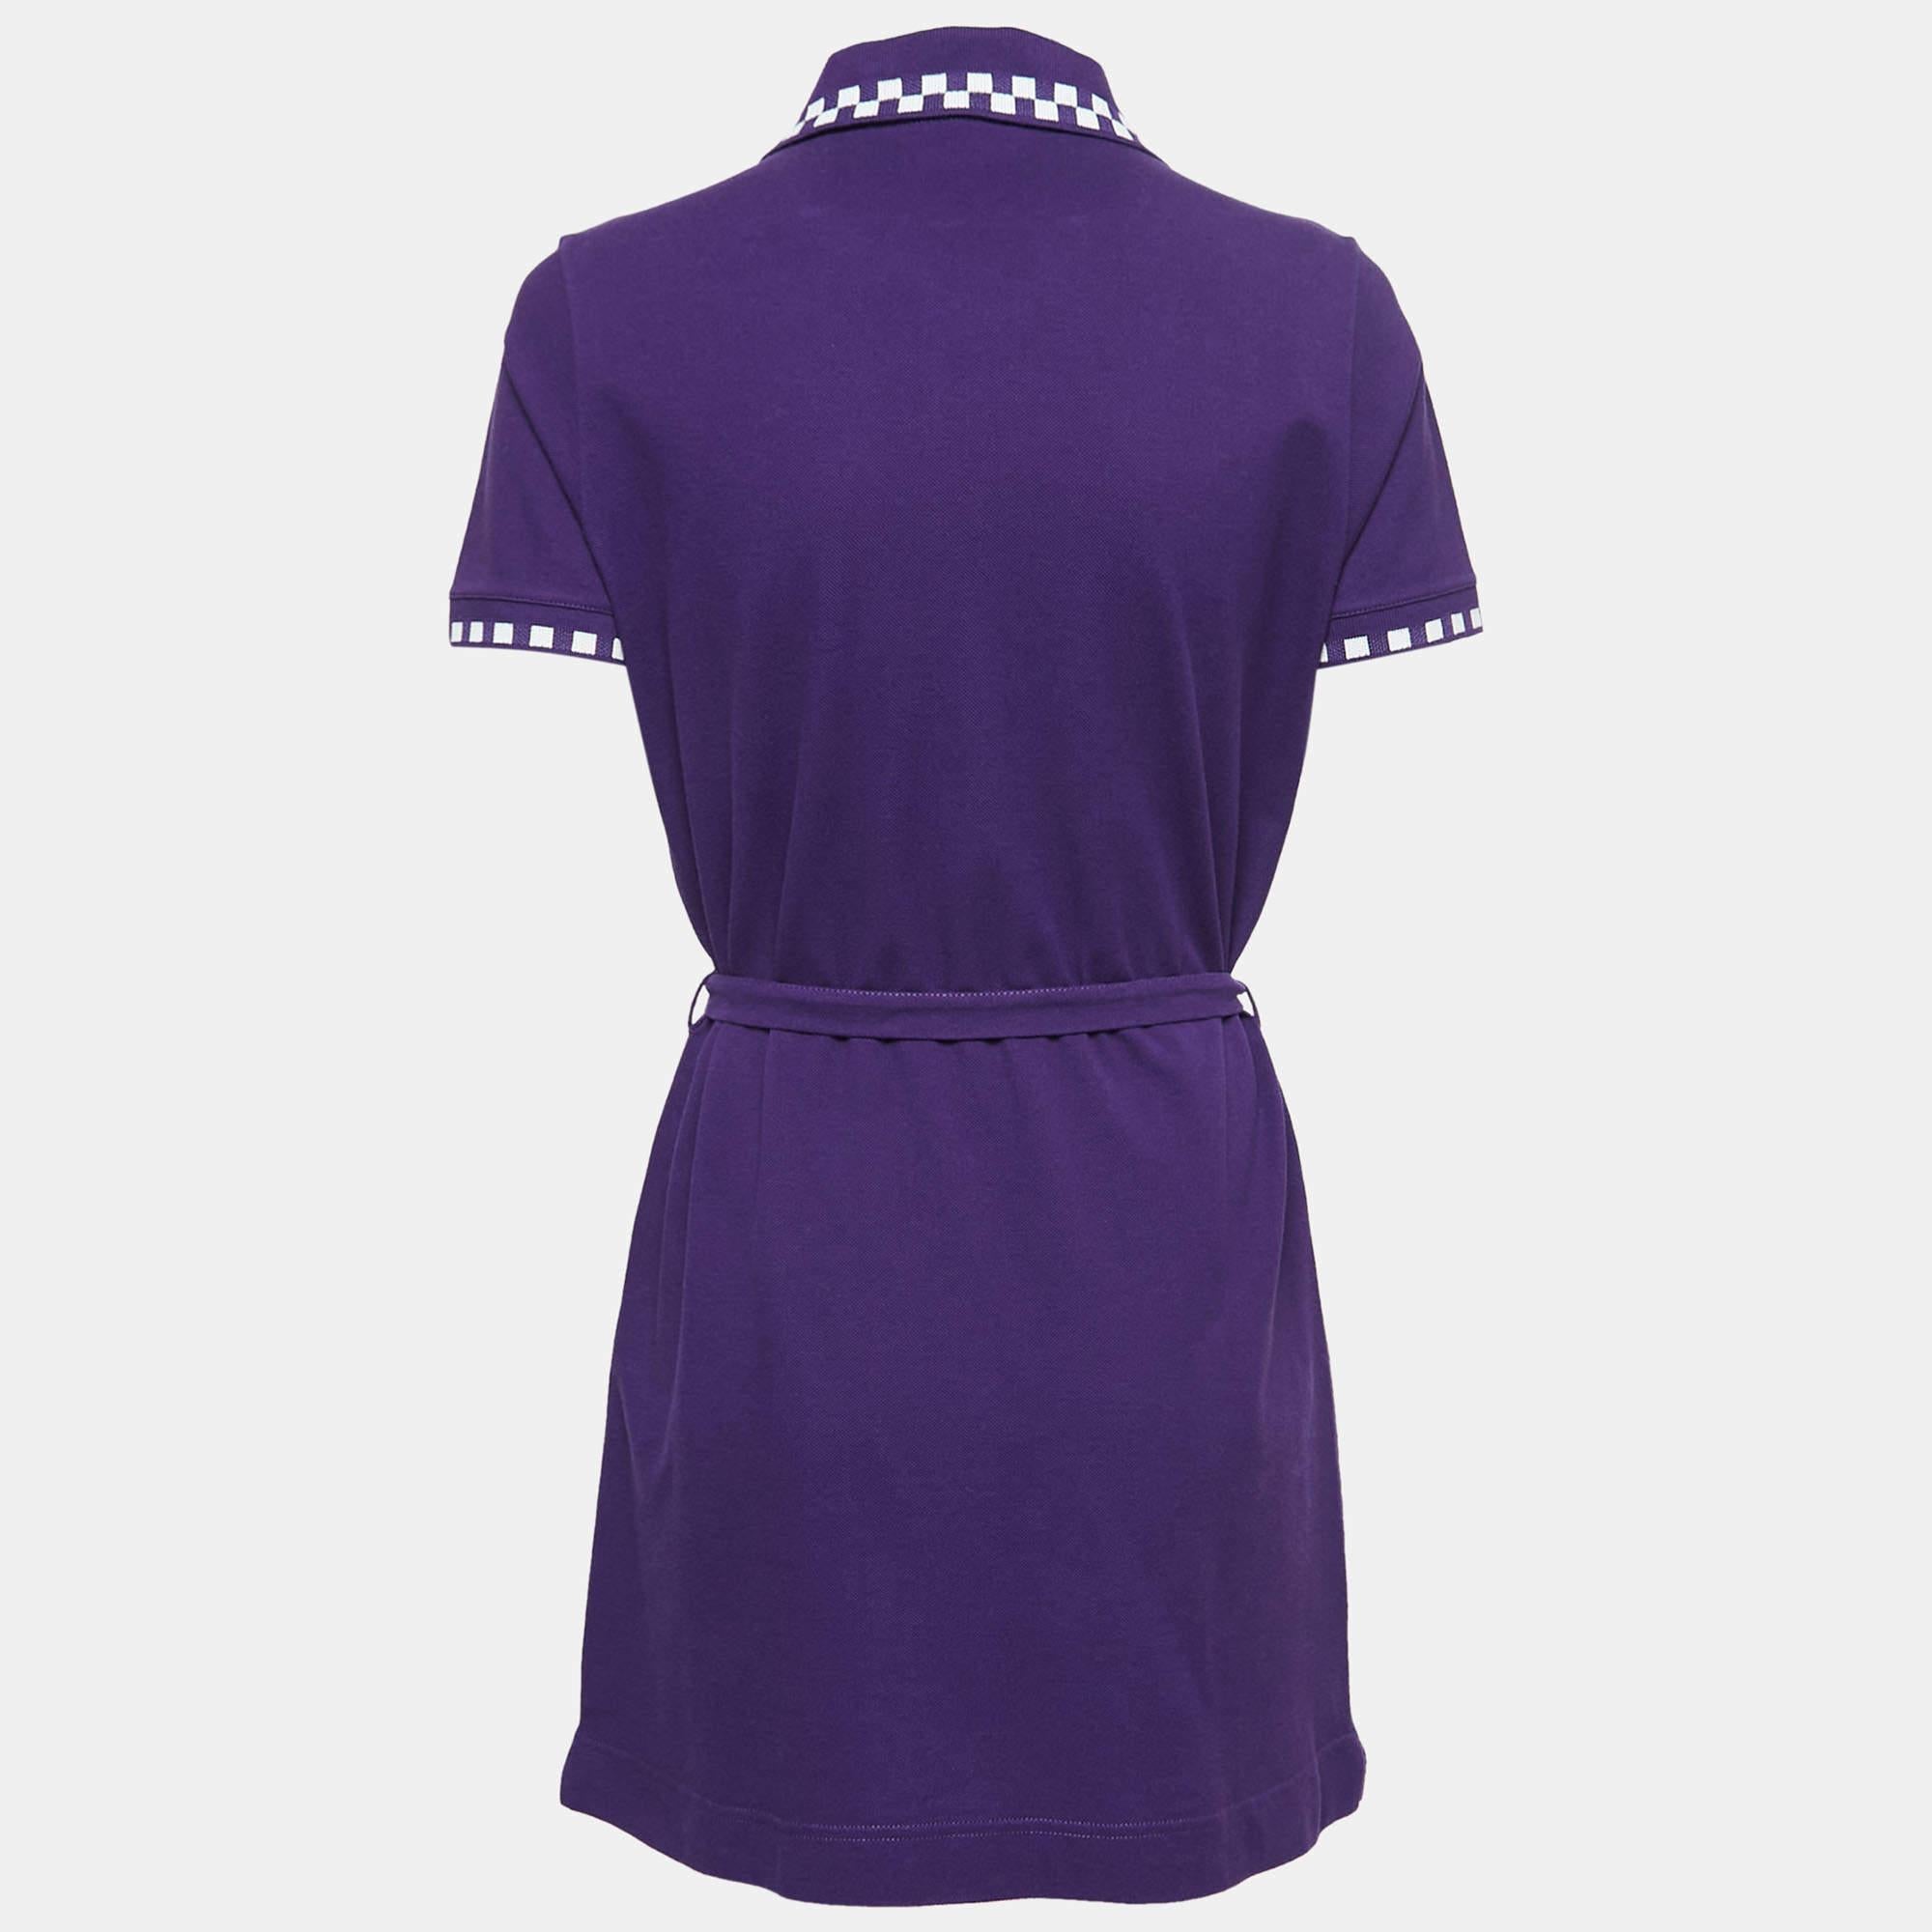 Highlight your love for the latest trends in fashion with this dress from the house of LV. Lend a casual but stylish edge to your outfit with this purple dress to finish your look. Get ready to move in style when you wear this comfortable cotton